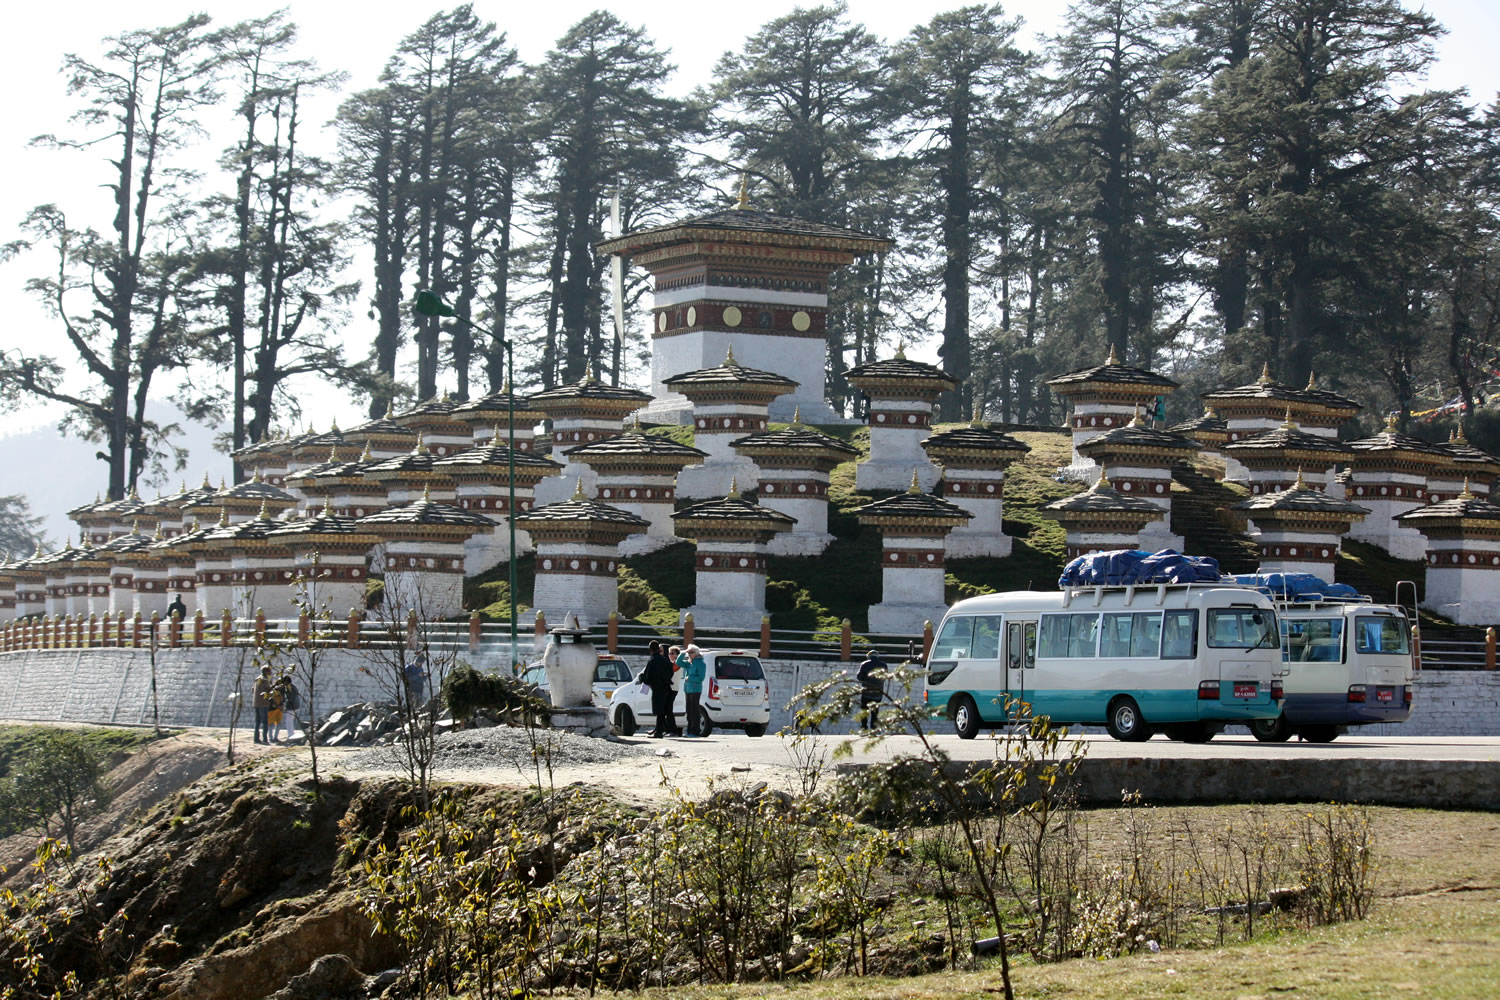 Some of the 108 chotens at Dochula Pass built as a memorial to Bhutanese soldiers.